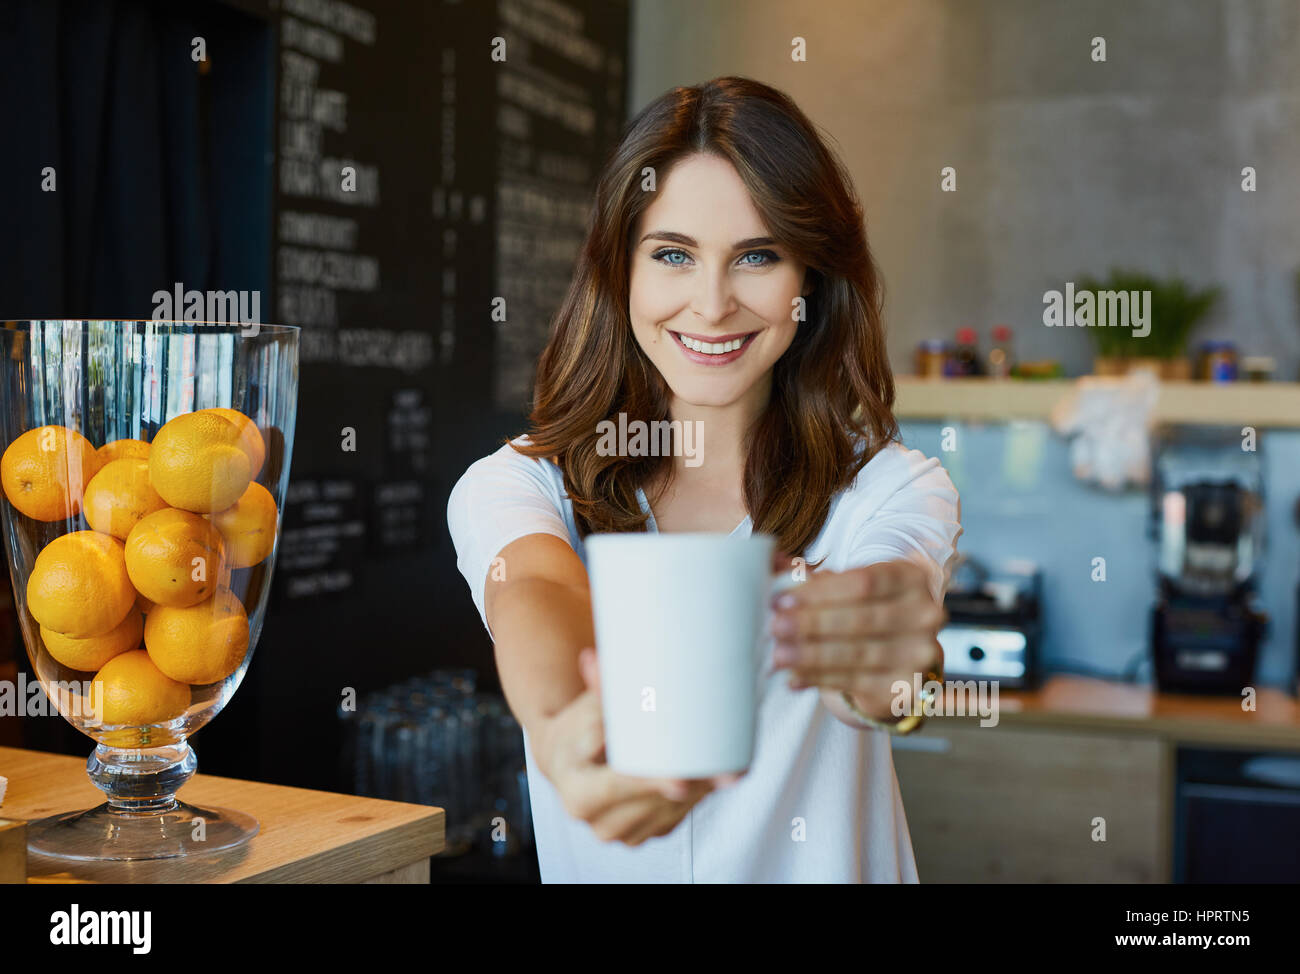 Young woman serving coffee in cafe Stock Photo